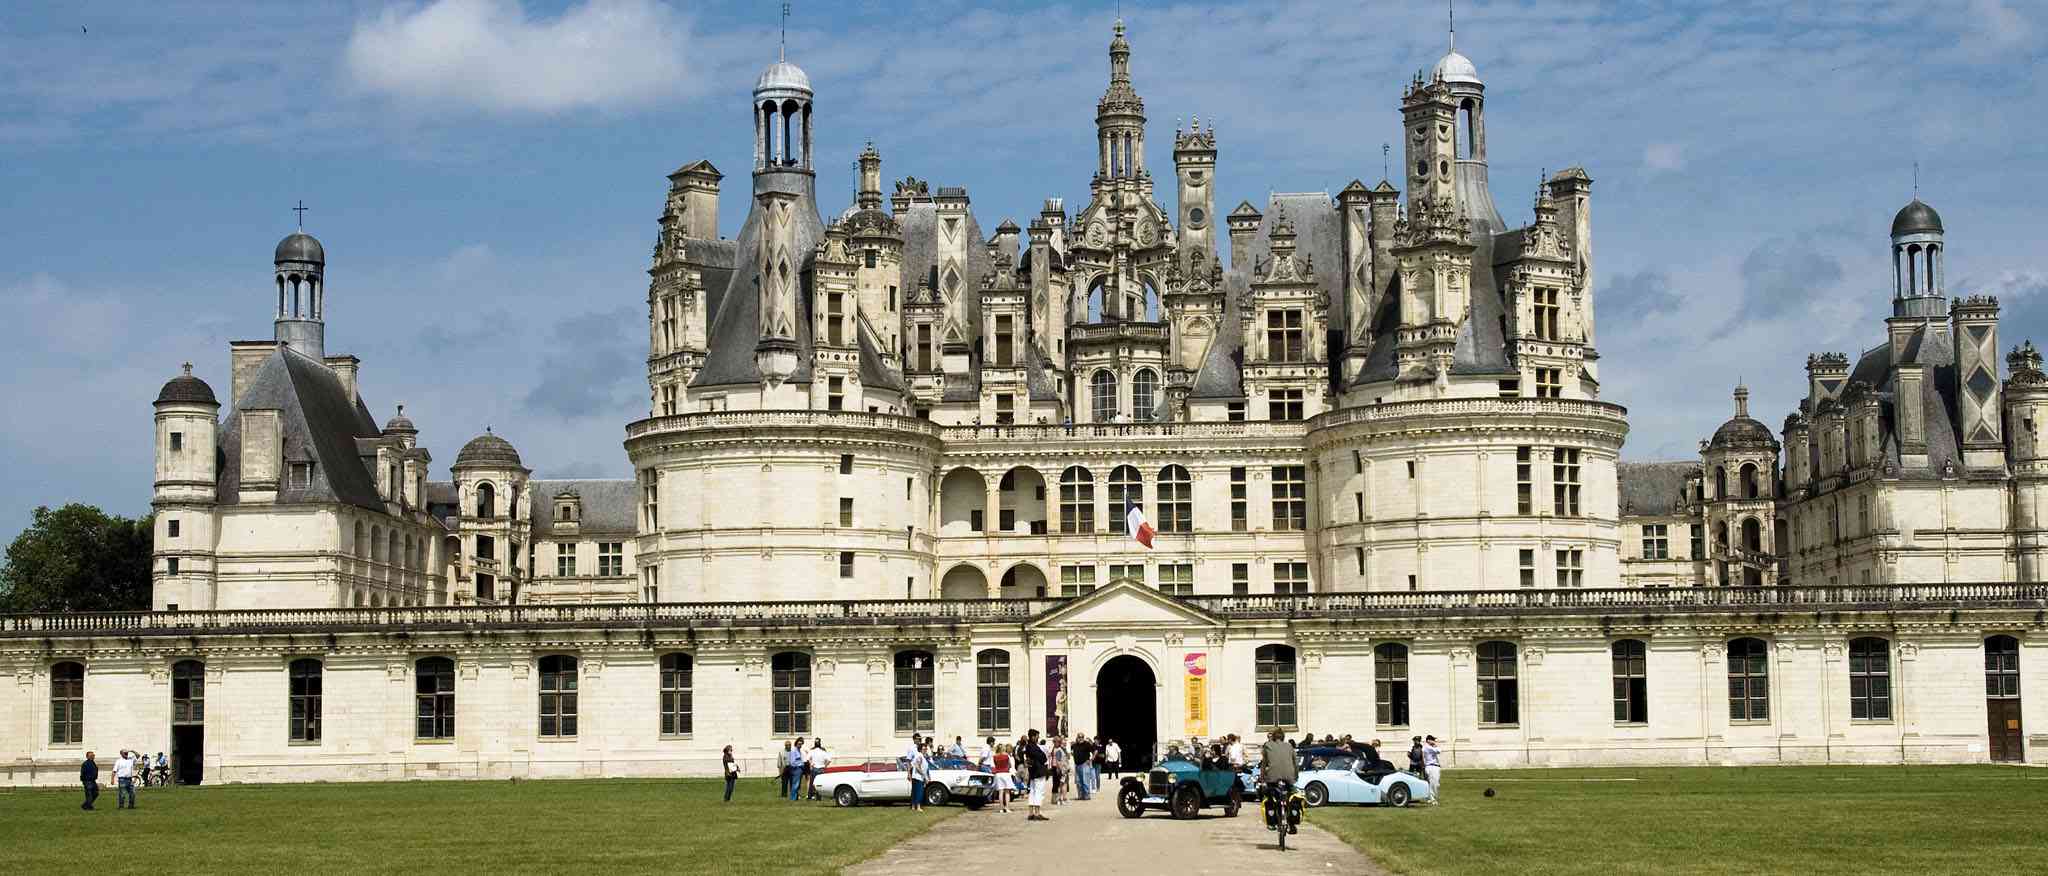 Magnificent faade of the immense Renaissance Chteau de Chambord in the Loire - photo 7